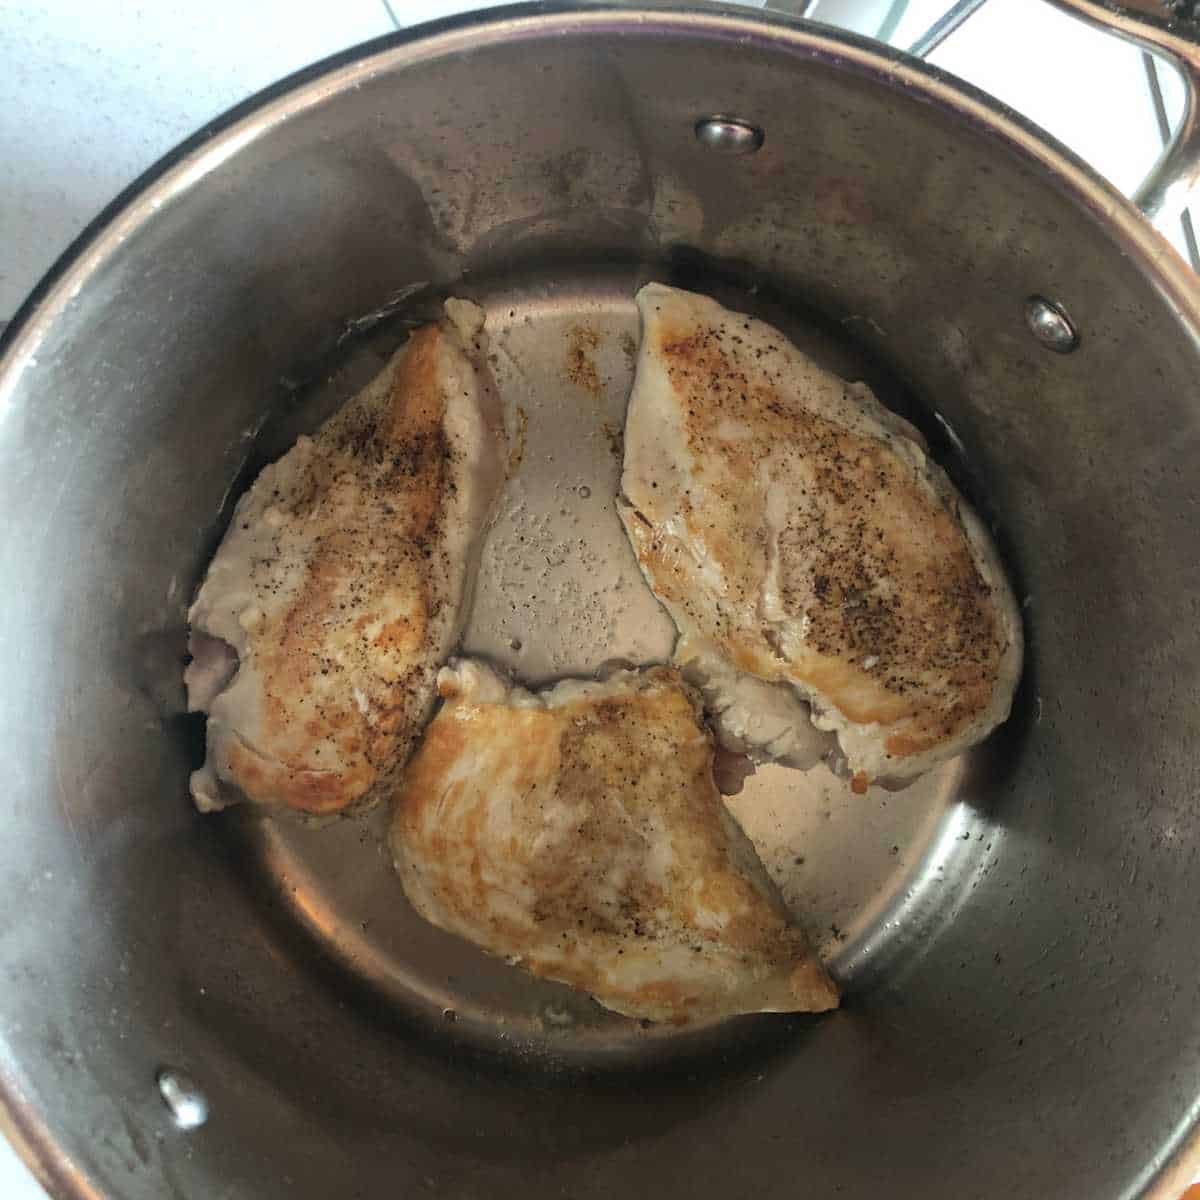 Cooking chicken breasts in a large stock pot